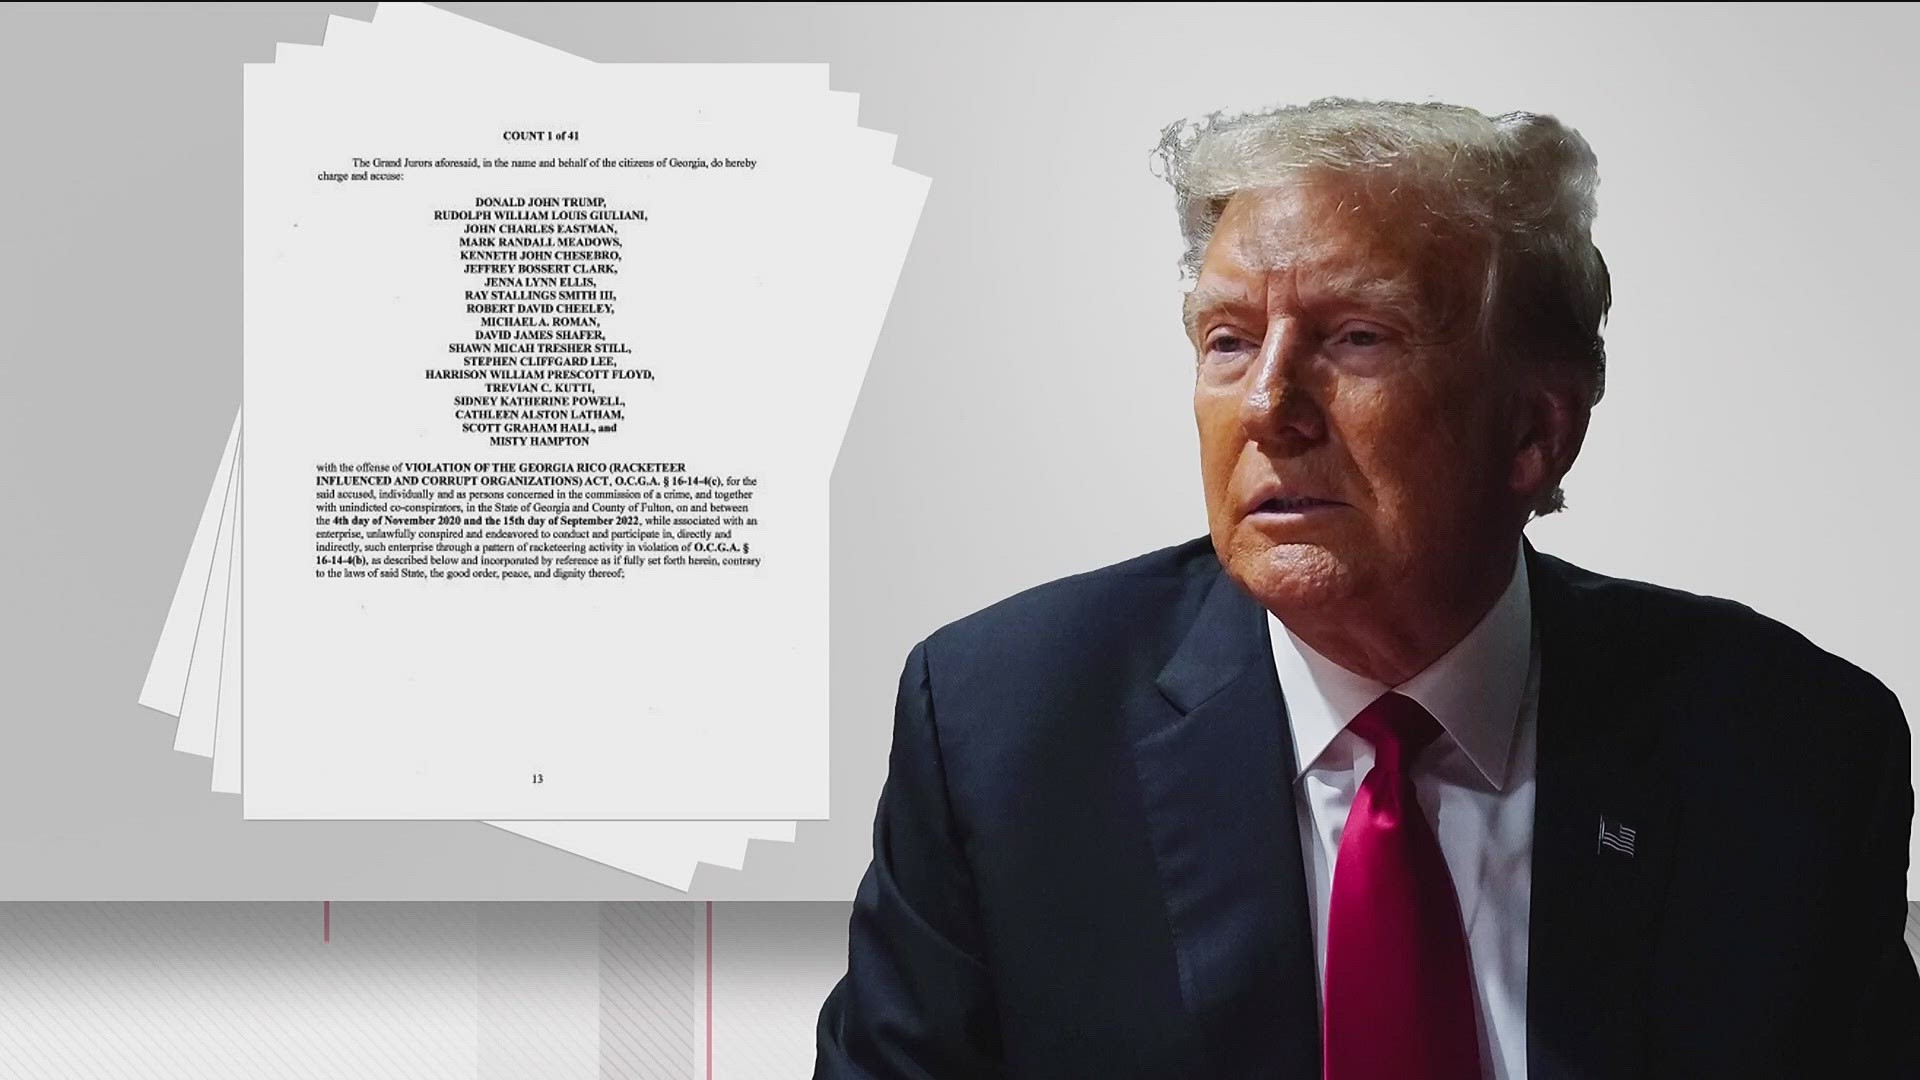 The nearly 100-page indictment accuses President Donald Trump and others of violating the law in their efforts to overturn the 2020 election. Here's what we know.